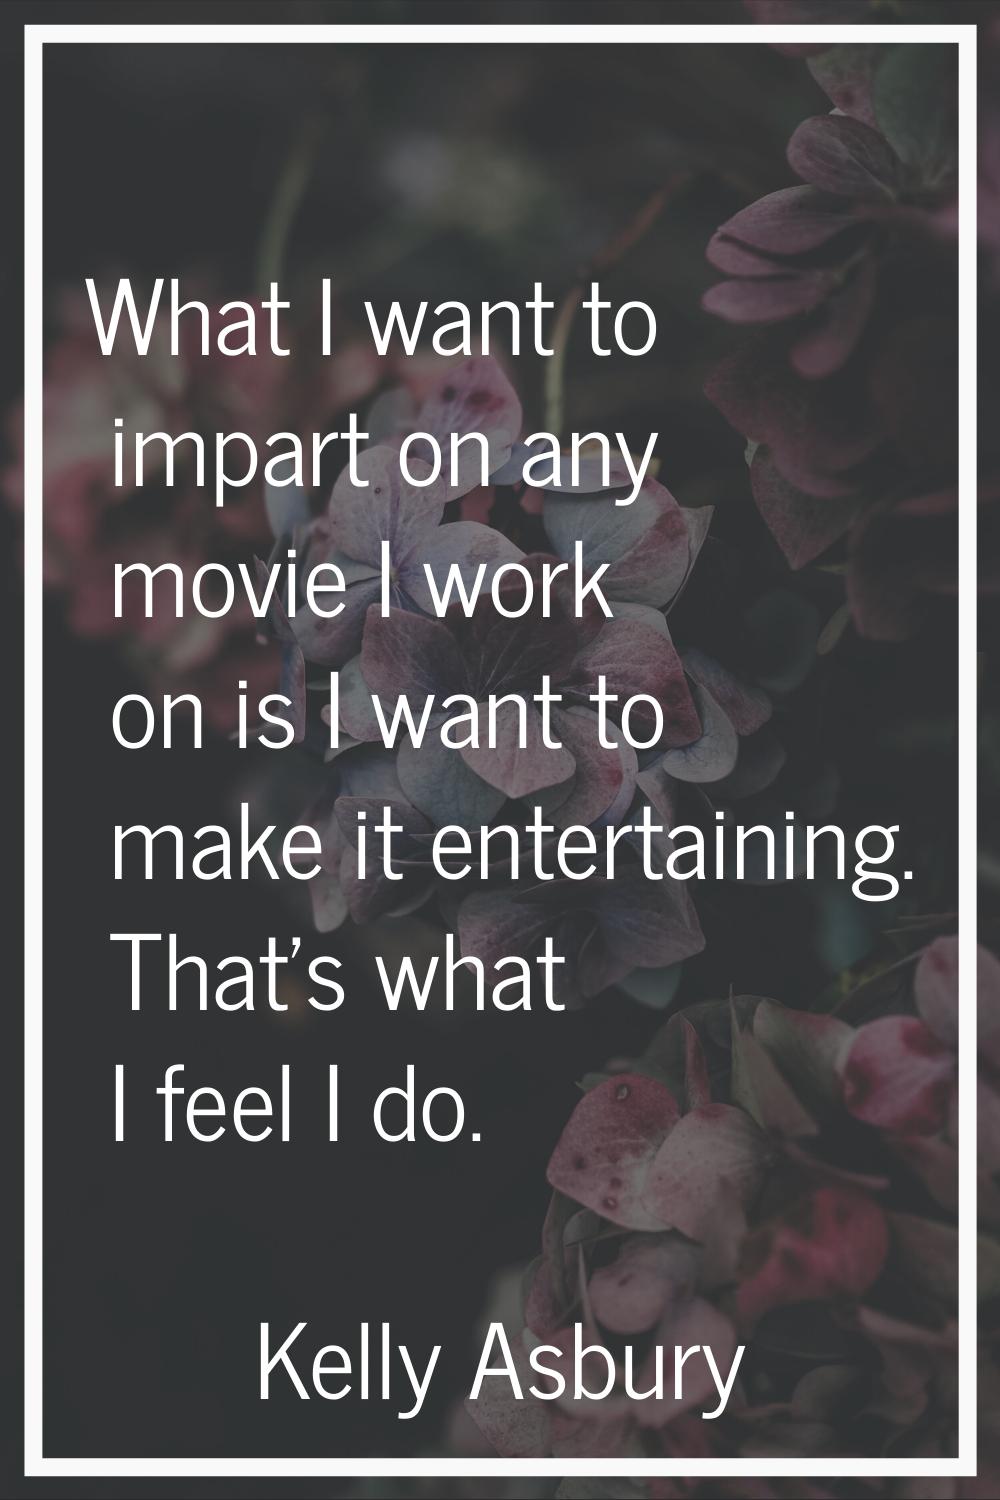 What I want to impart on any movie I work on is I want to make it entertaining. That's what I feel 